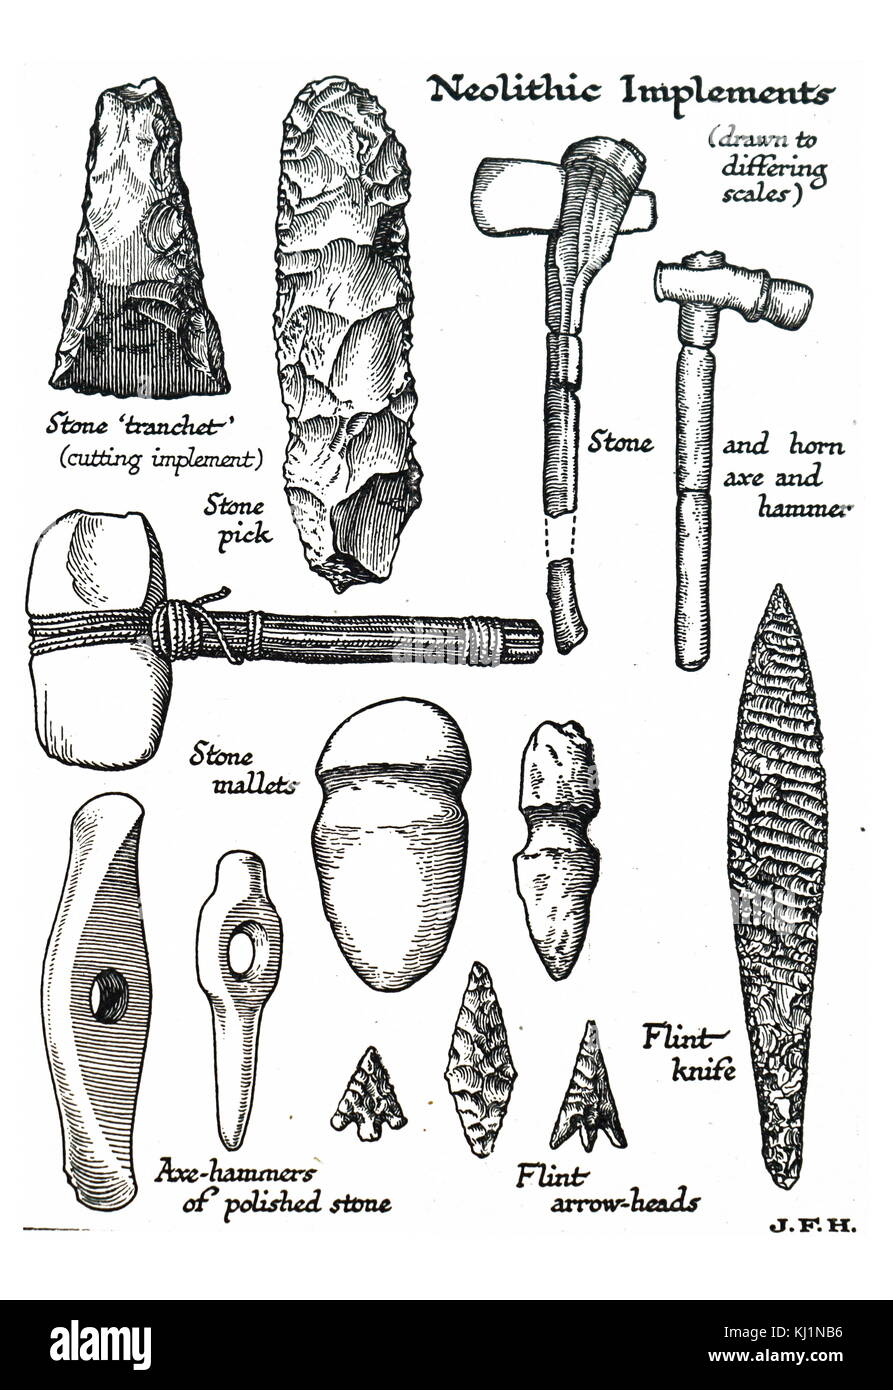 Engraving depicting Neolithic Implements including a stone tranchet, stone pick, stone and horn axe, flint knife, stone mallets, axe-hammers made from polished stone and flint arrow-heads. Dated 19th Century Stock Photo